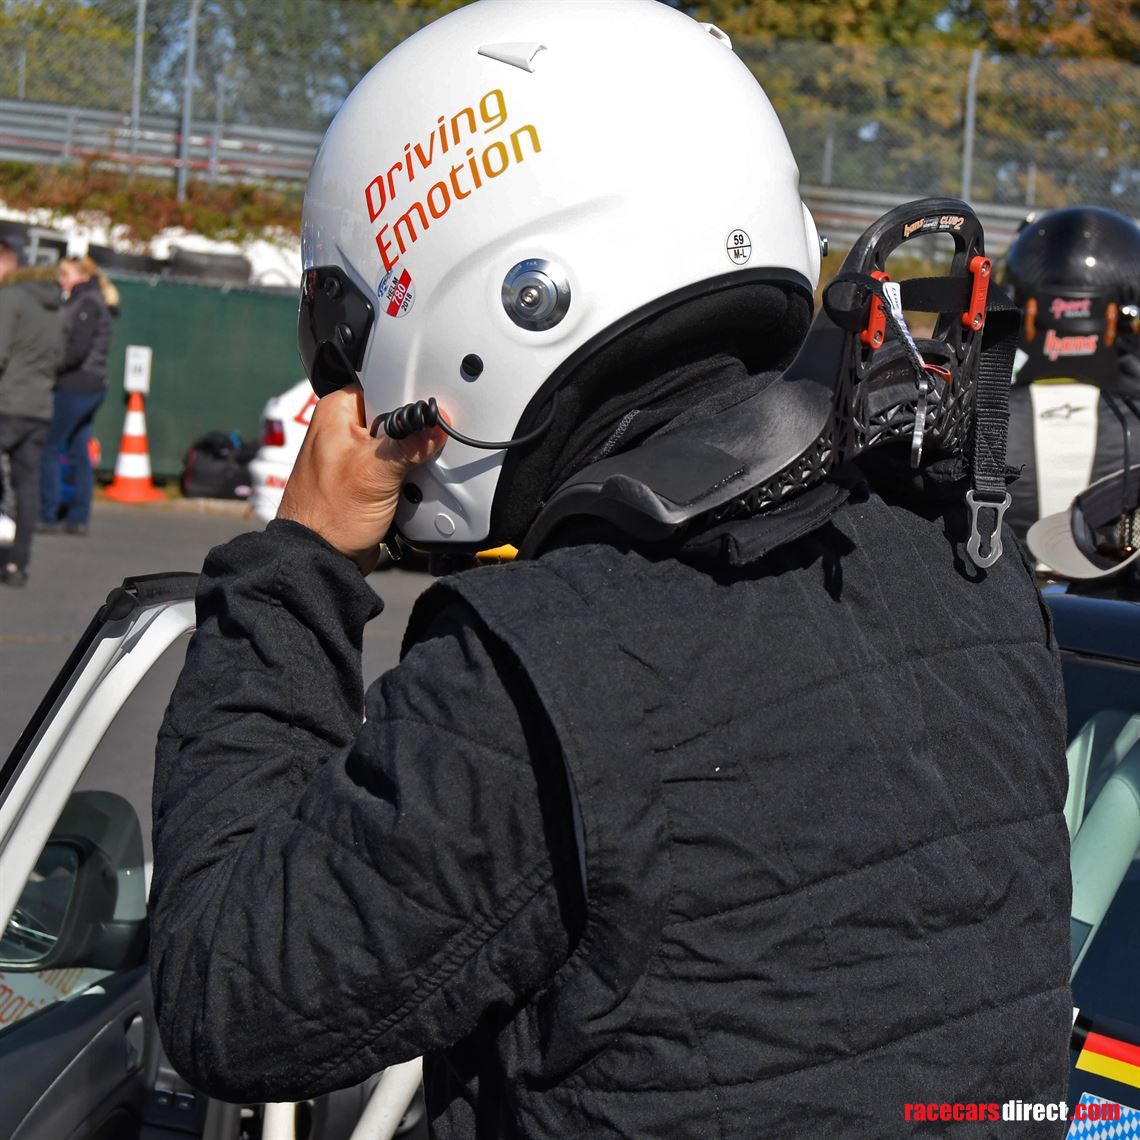 drivers-wanted-for-bmw-e90---v4---in-nls-vln